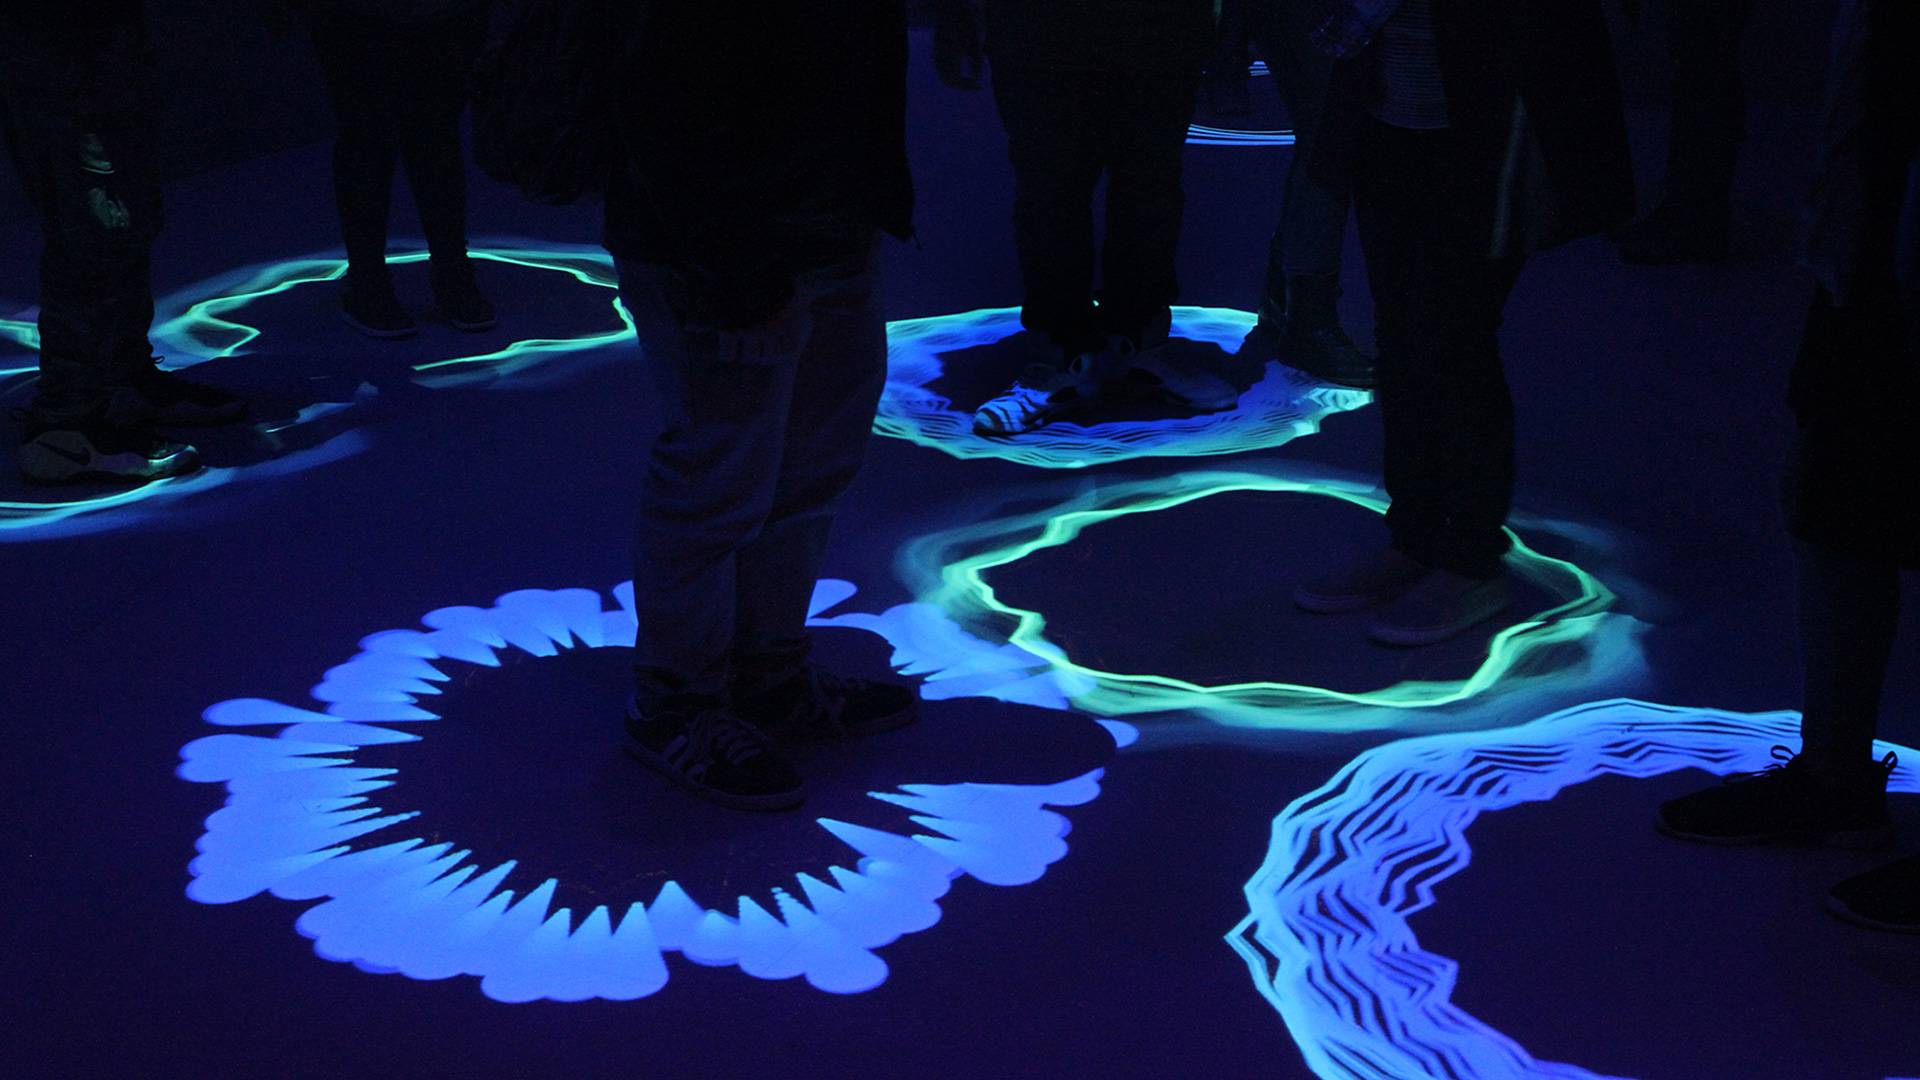 Museum of Feelings: Energized Room, responsive energy halos and animations